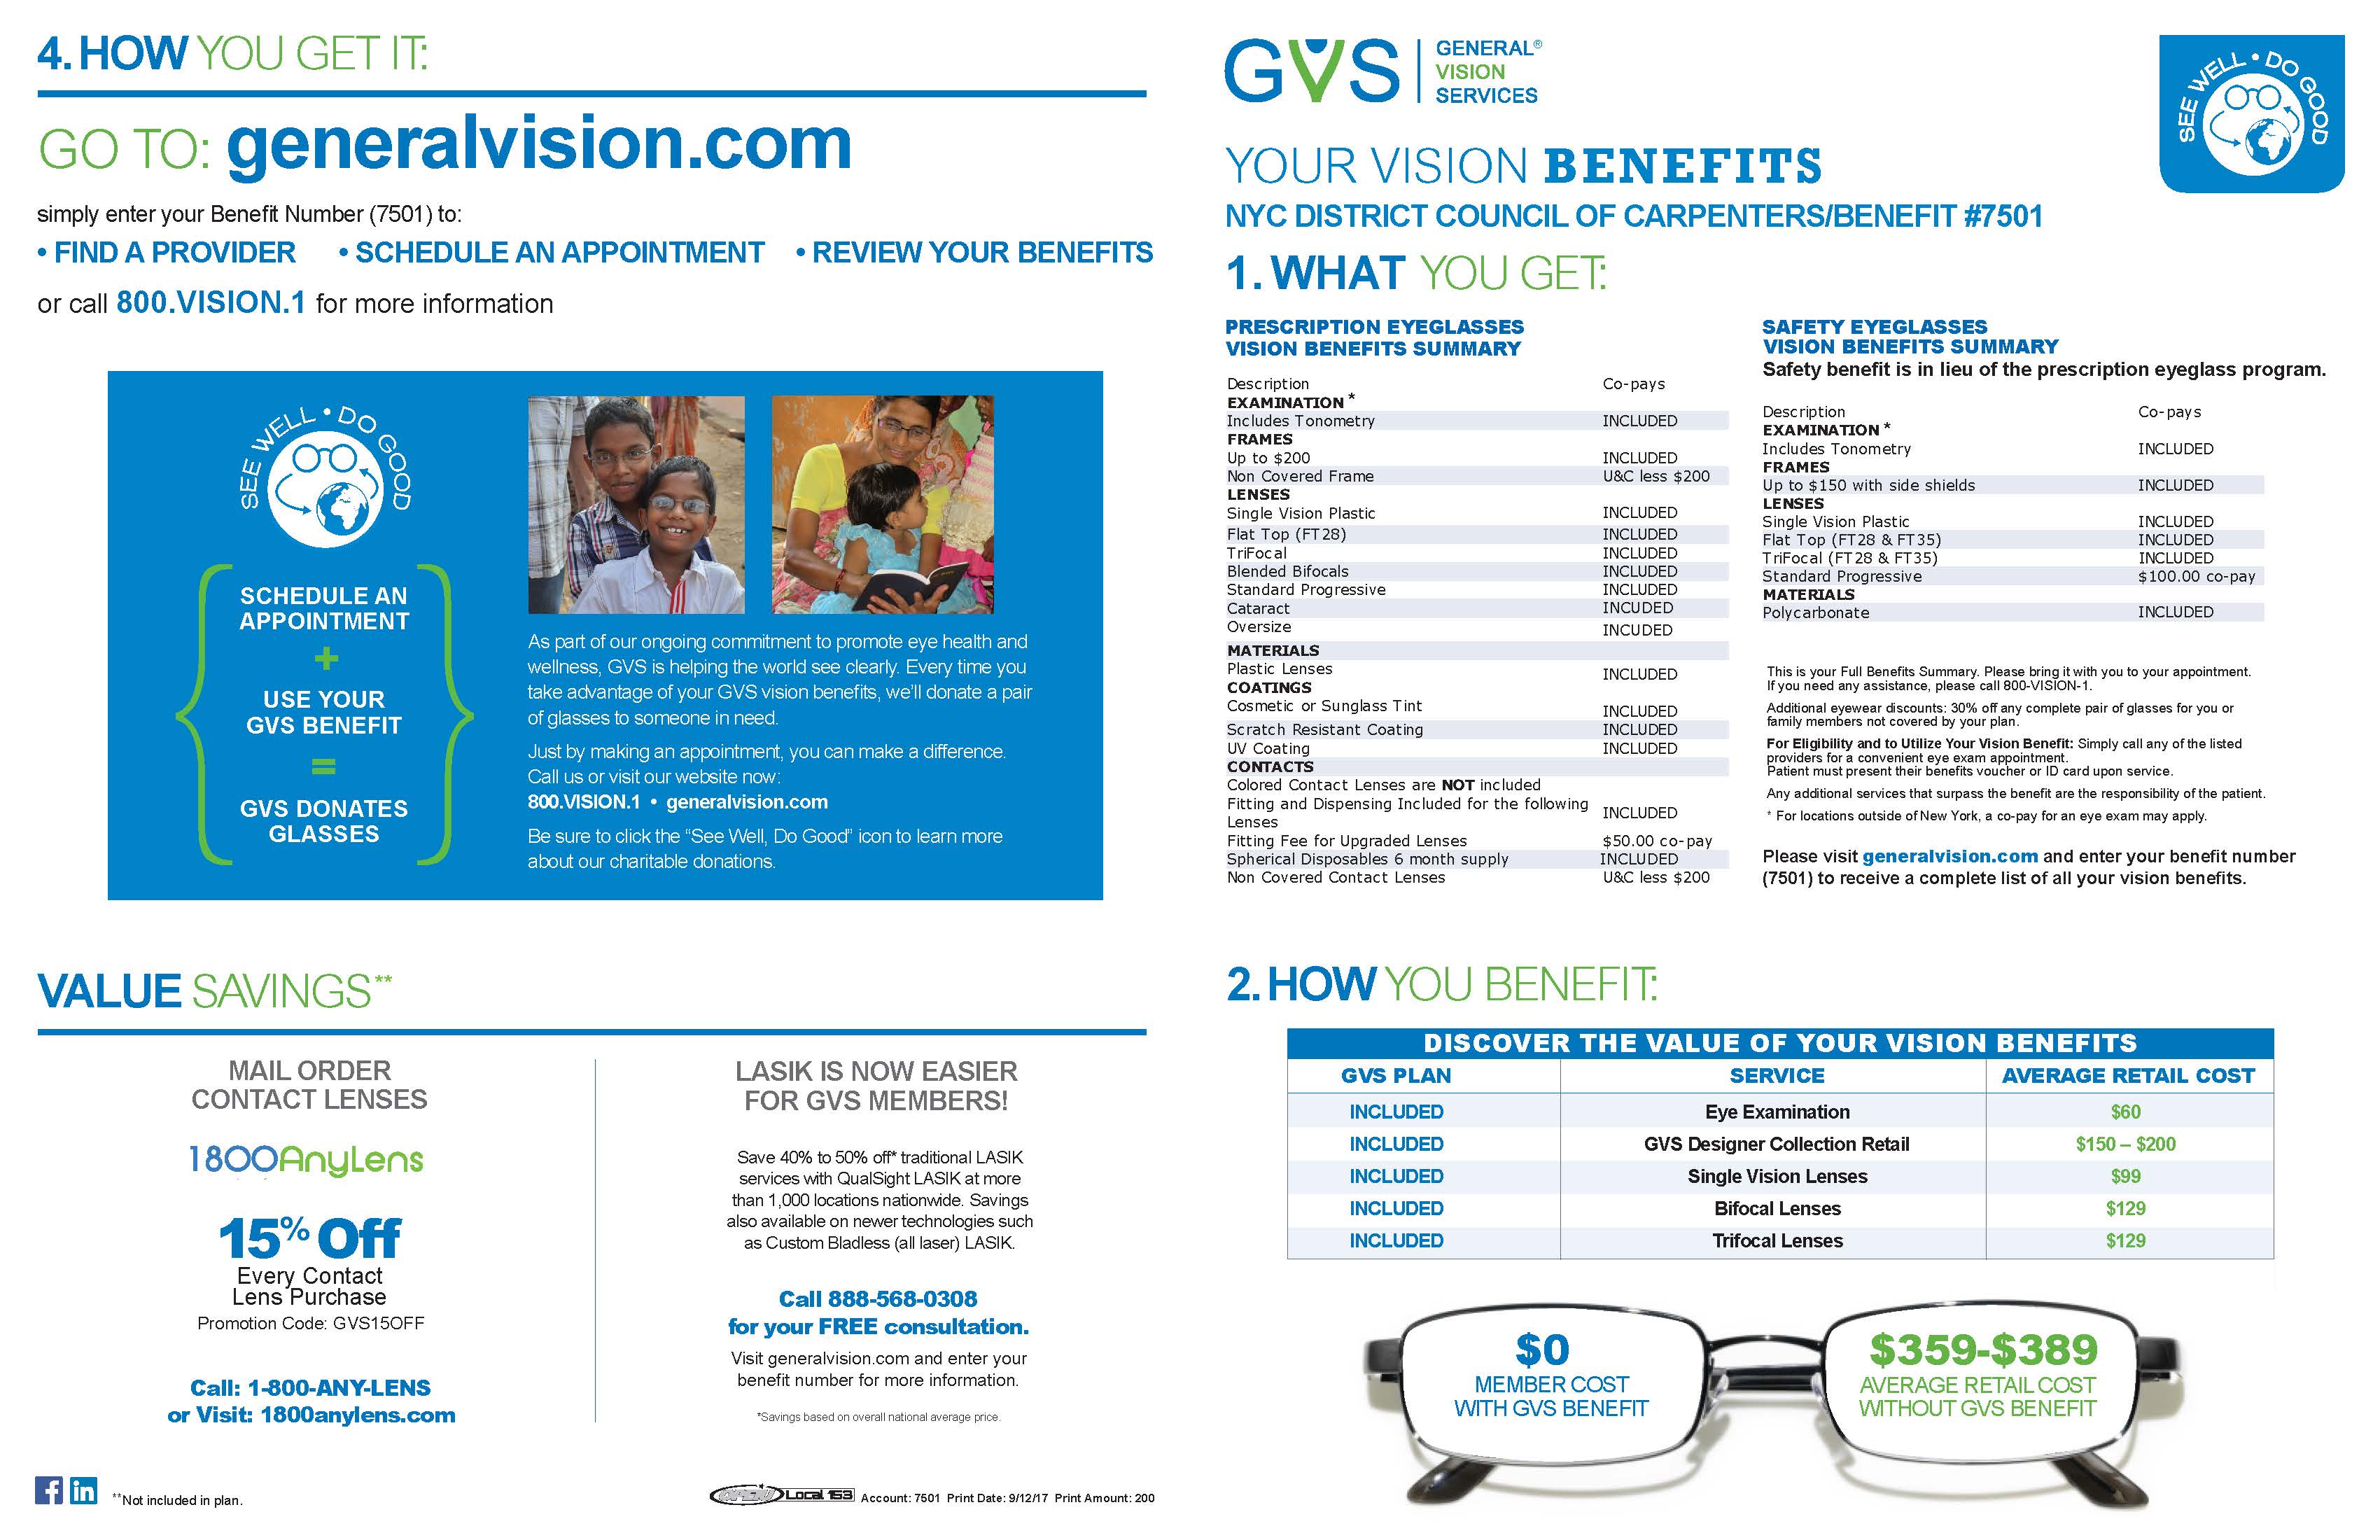 Vision Benefit through GVS: $50 Gift Card and New Access to Safety